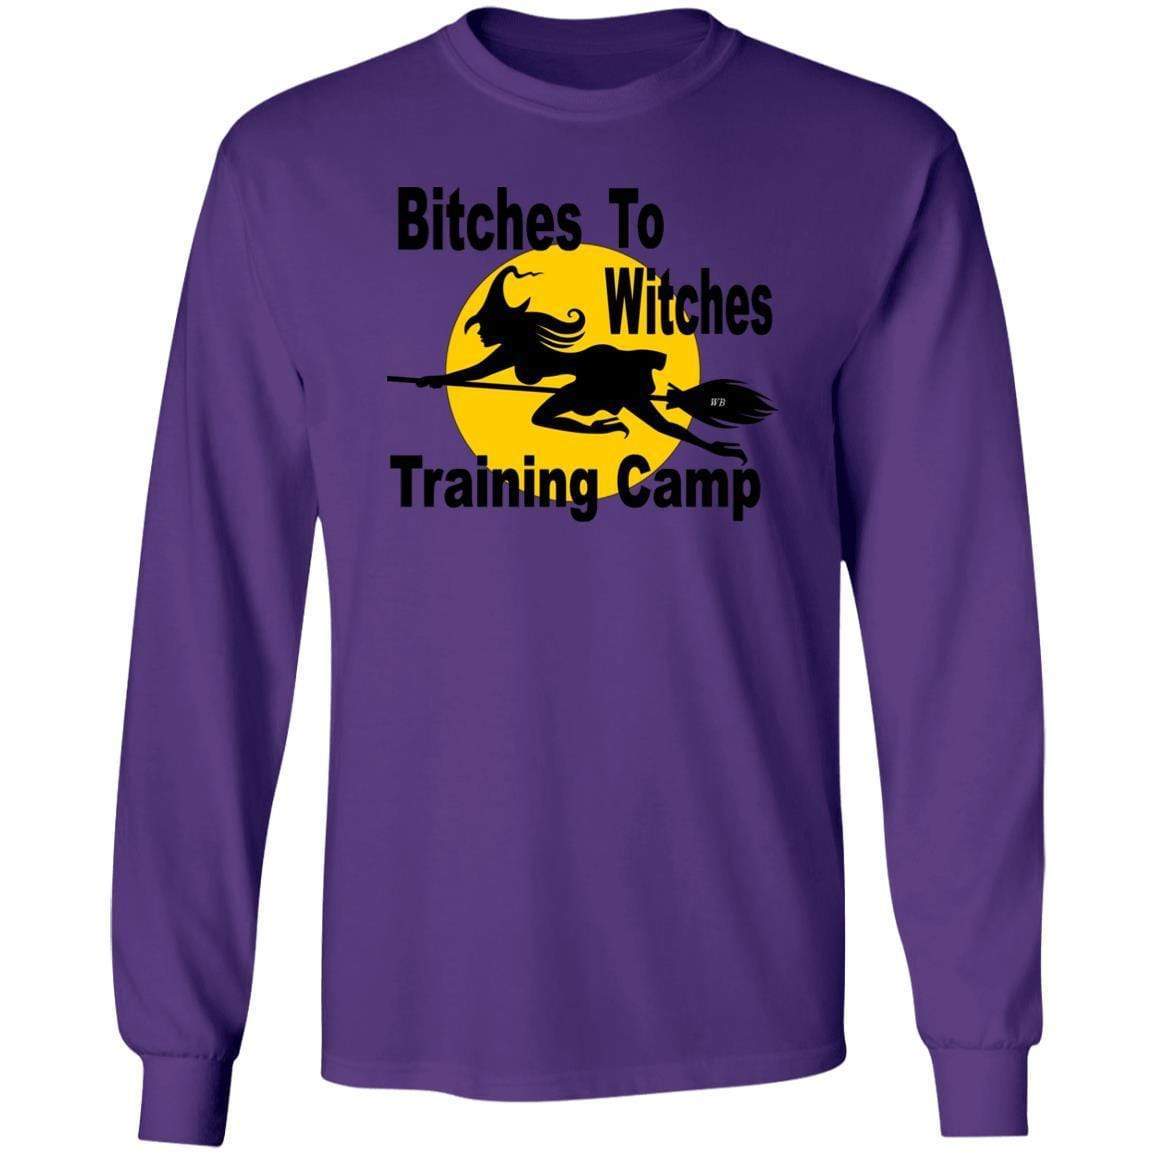 T-Shirts Purple / S WineyBitches.Co "Bitches To Witches Training Camp" LS Ultra Cotton T-Shirt WineyBitchesCo